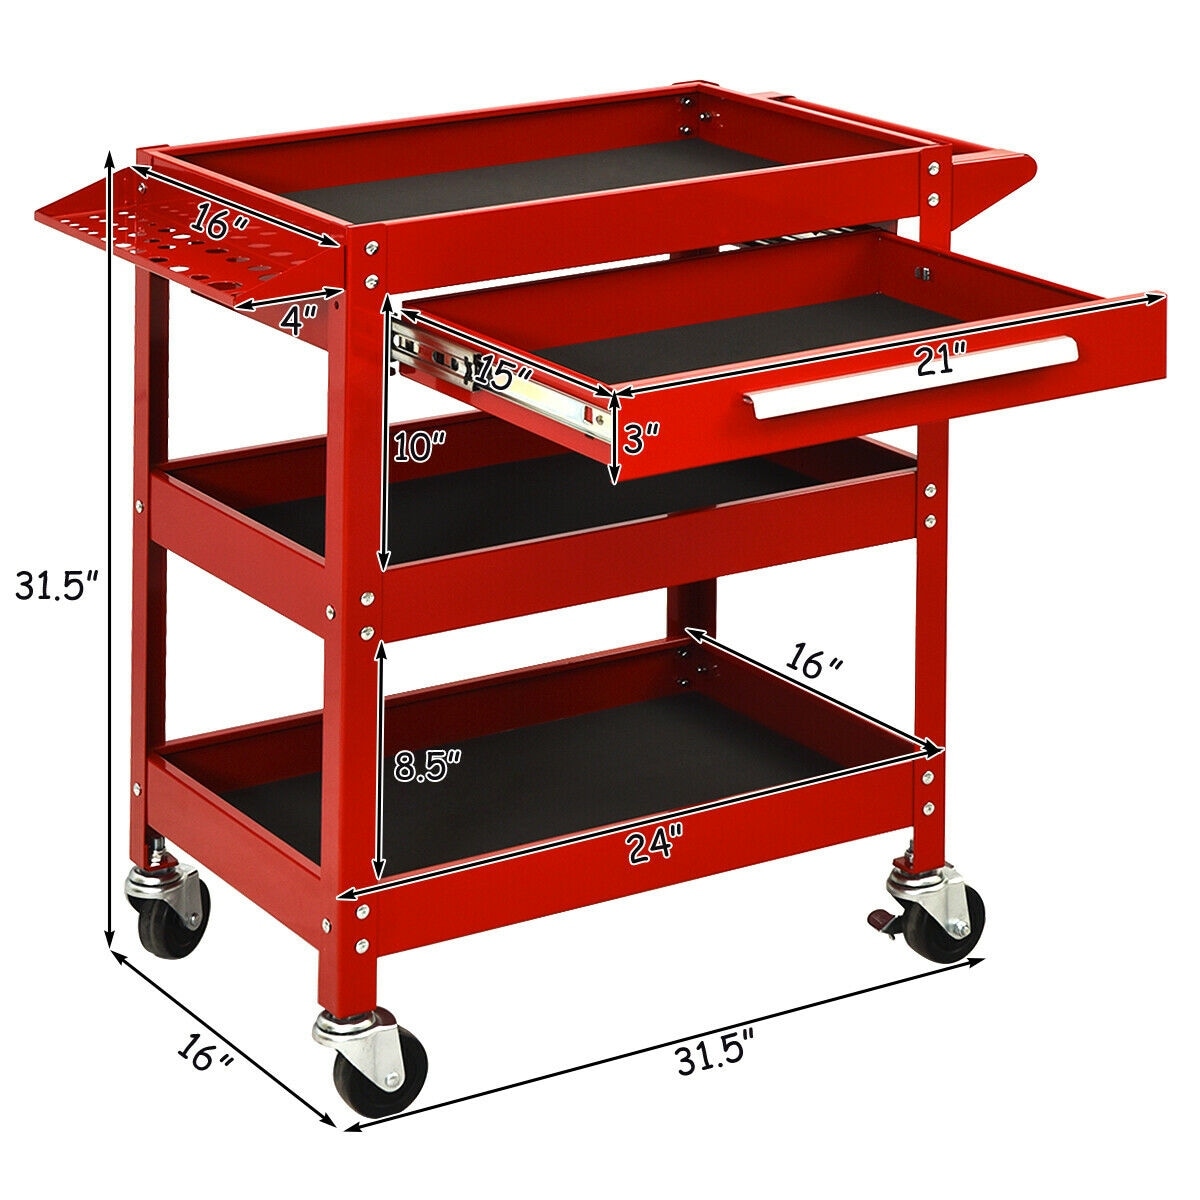 DURATECH 30-1/2 Inch 3-Drawer Rolling Tool Cart, Heavy Duty Utility  Industrial Service Cart Storage Organizer With Casters And Locking System,  For Mechanics, Warehouse, Garage, 400 Lbs Load Capacity